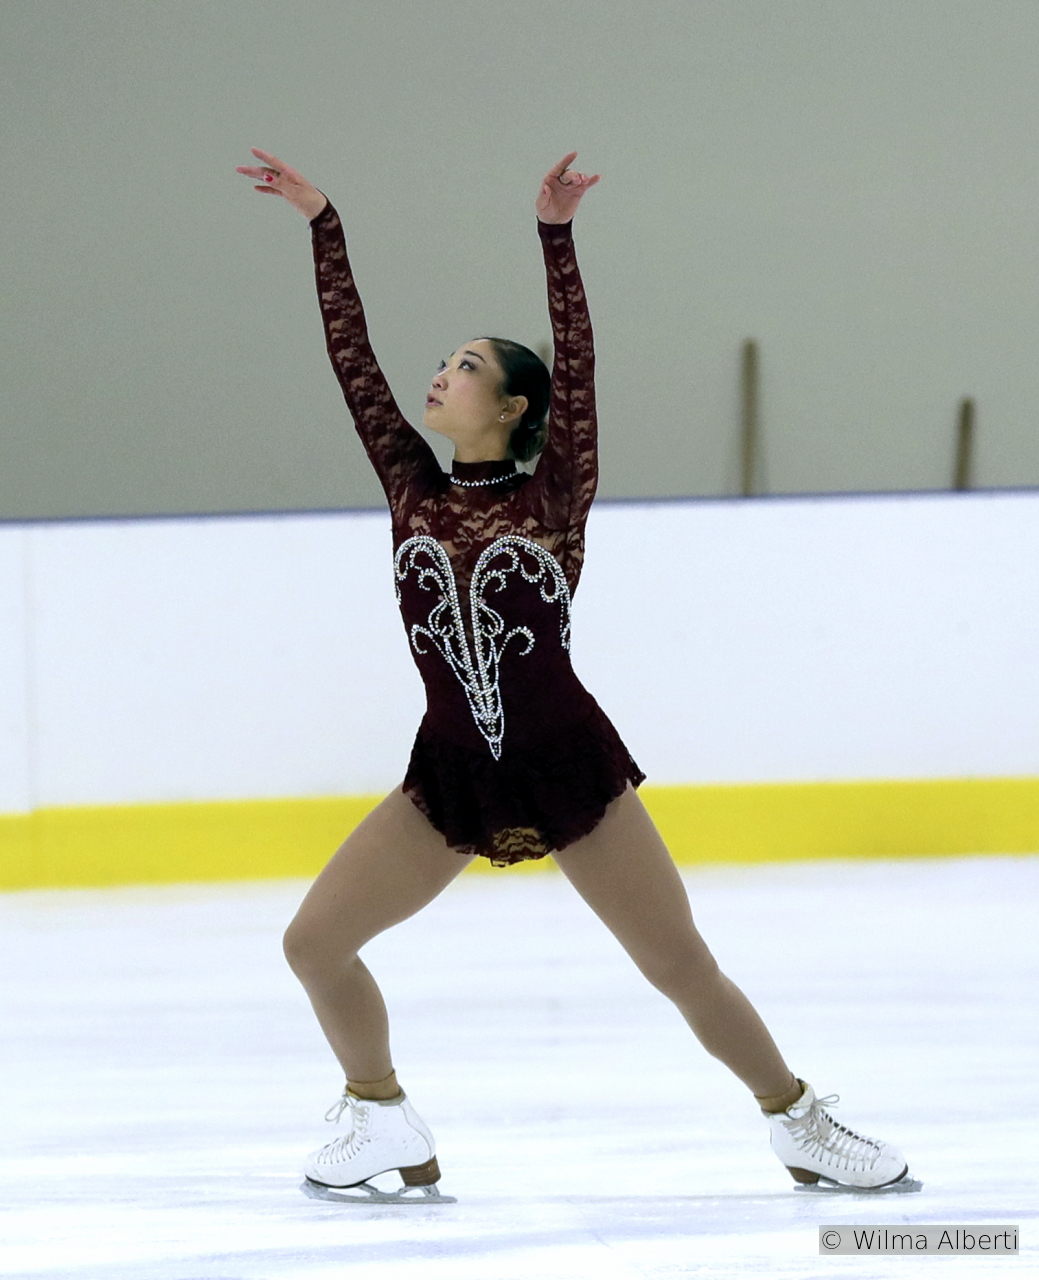 Frédéric Chopin’s „Nocturne no. 20 in C-sharp minor” is Mirai Nagasu’s musical choice for this season’s short program – and she skates it with ease and sensibility; the routine has been choreographed by Jeffrey Buttle